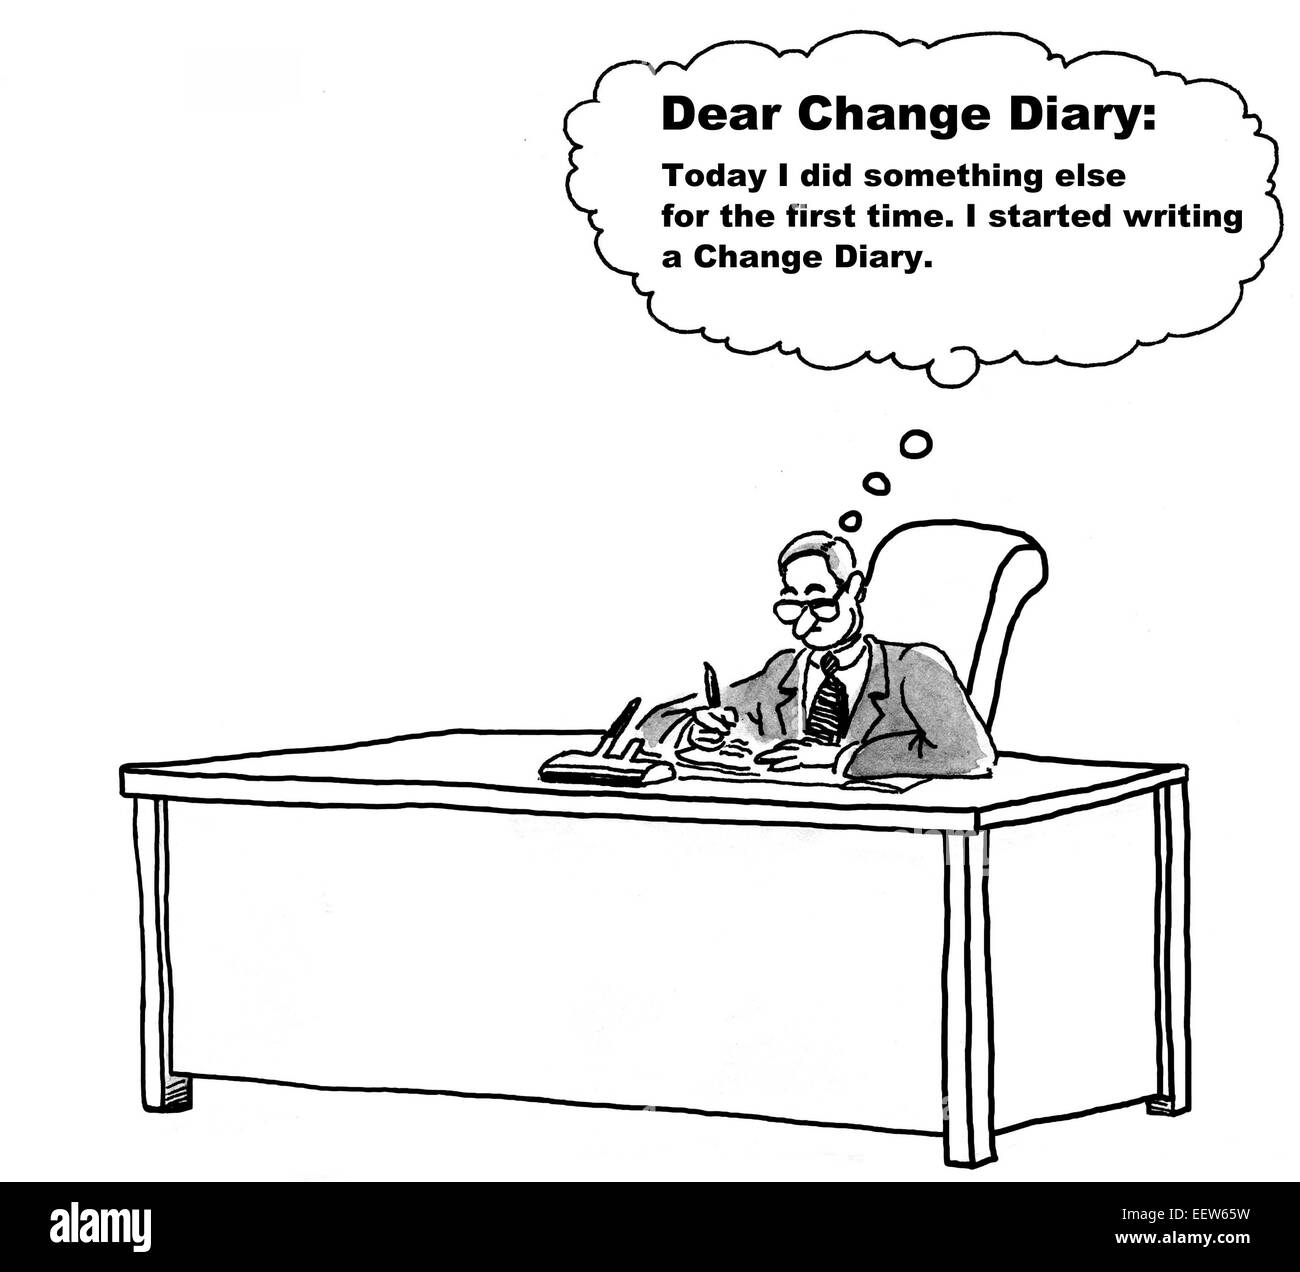 Cartoon of businessman encouraging himself to change by writing a change diary. Stock Photo